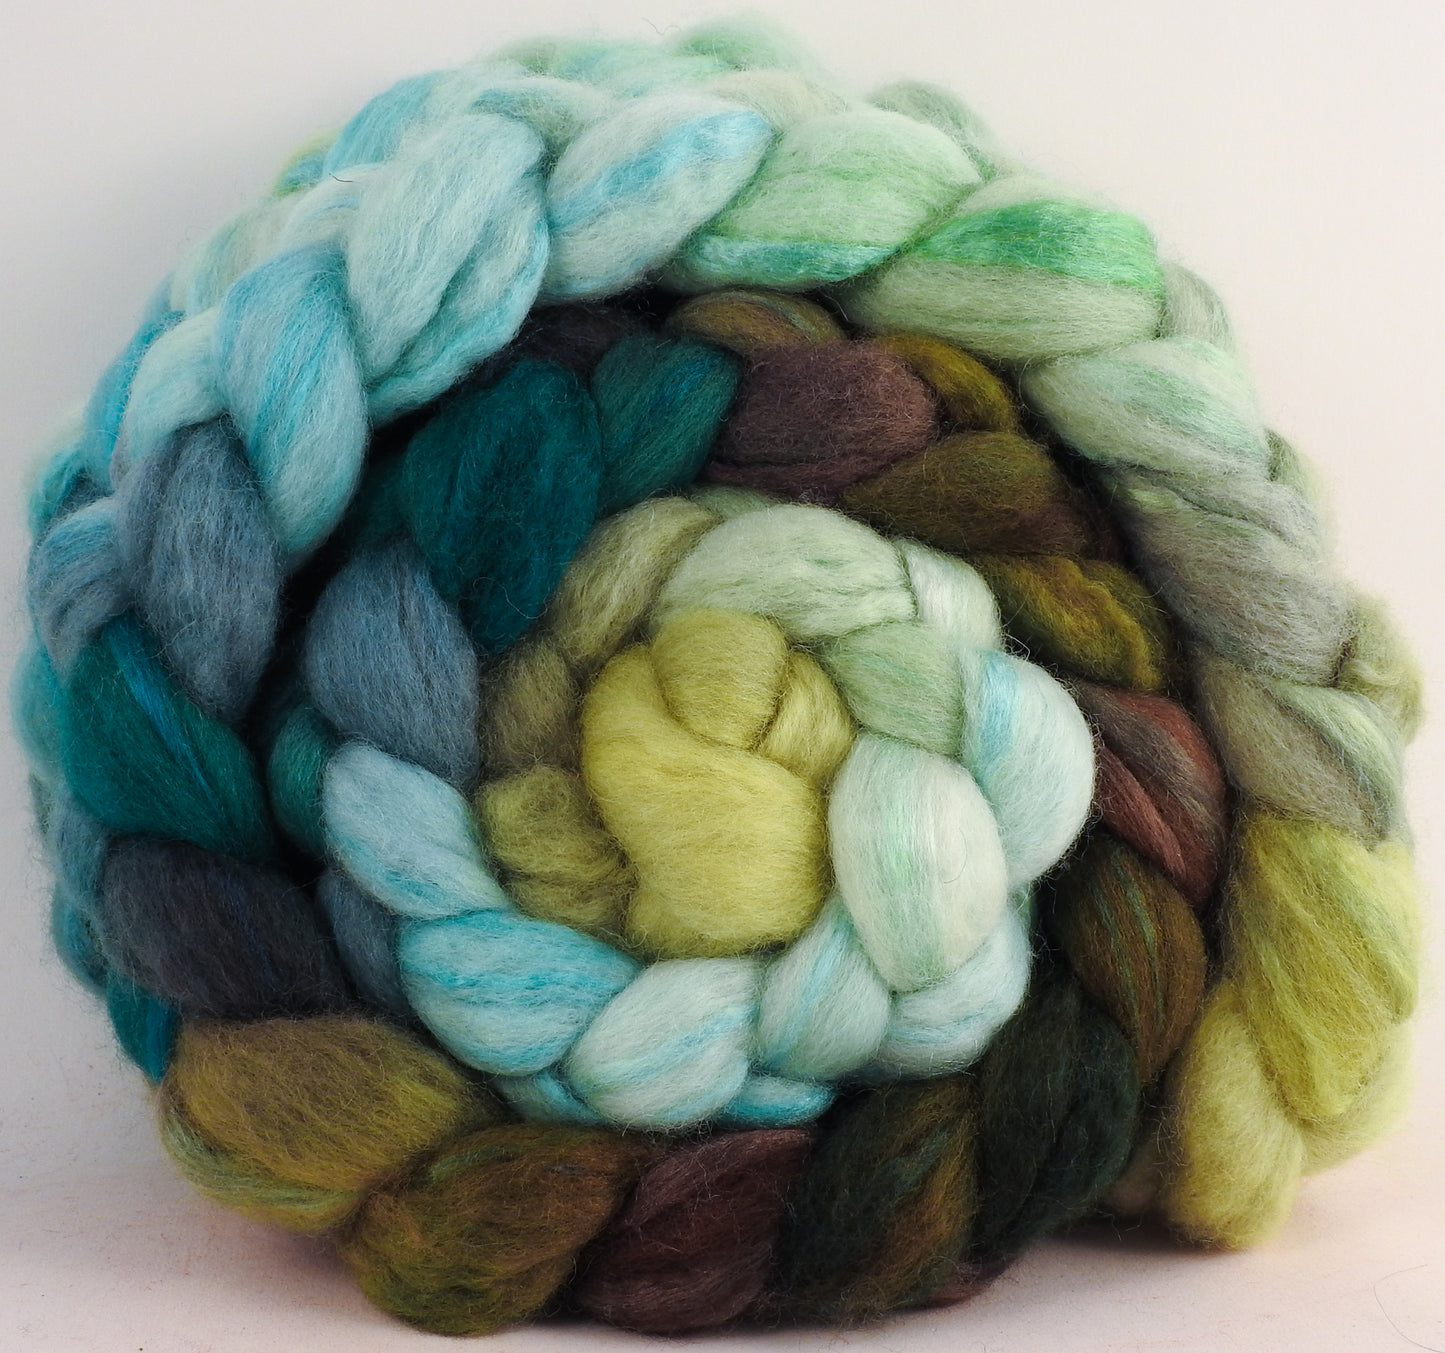 Blue-faced Leicester/ Tussah Silk (70/30) -Dryad - (5.8 oz.)